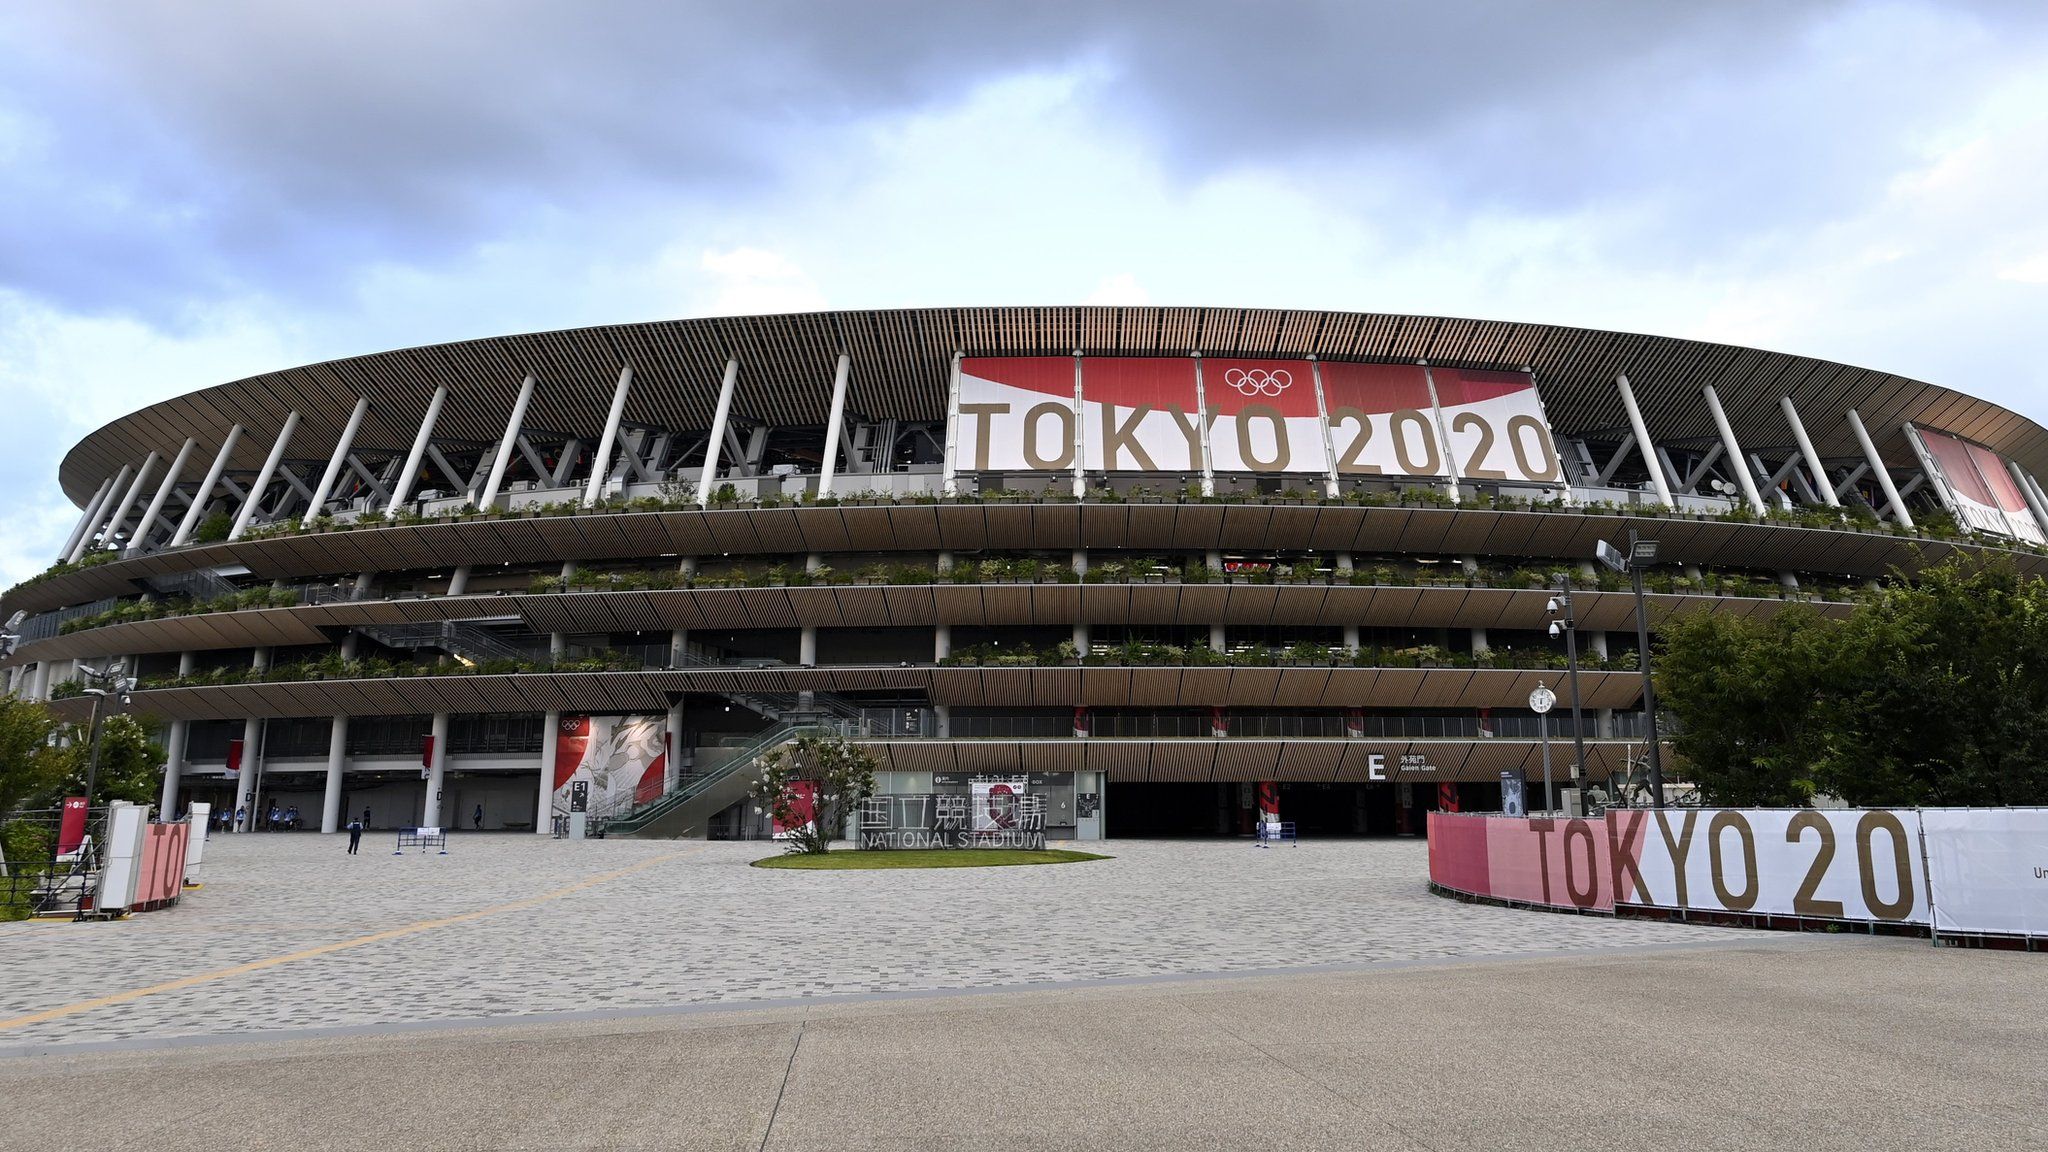 The outside of the Olympic stadium in Tokyo